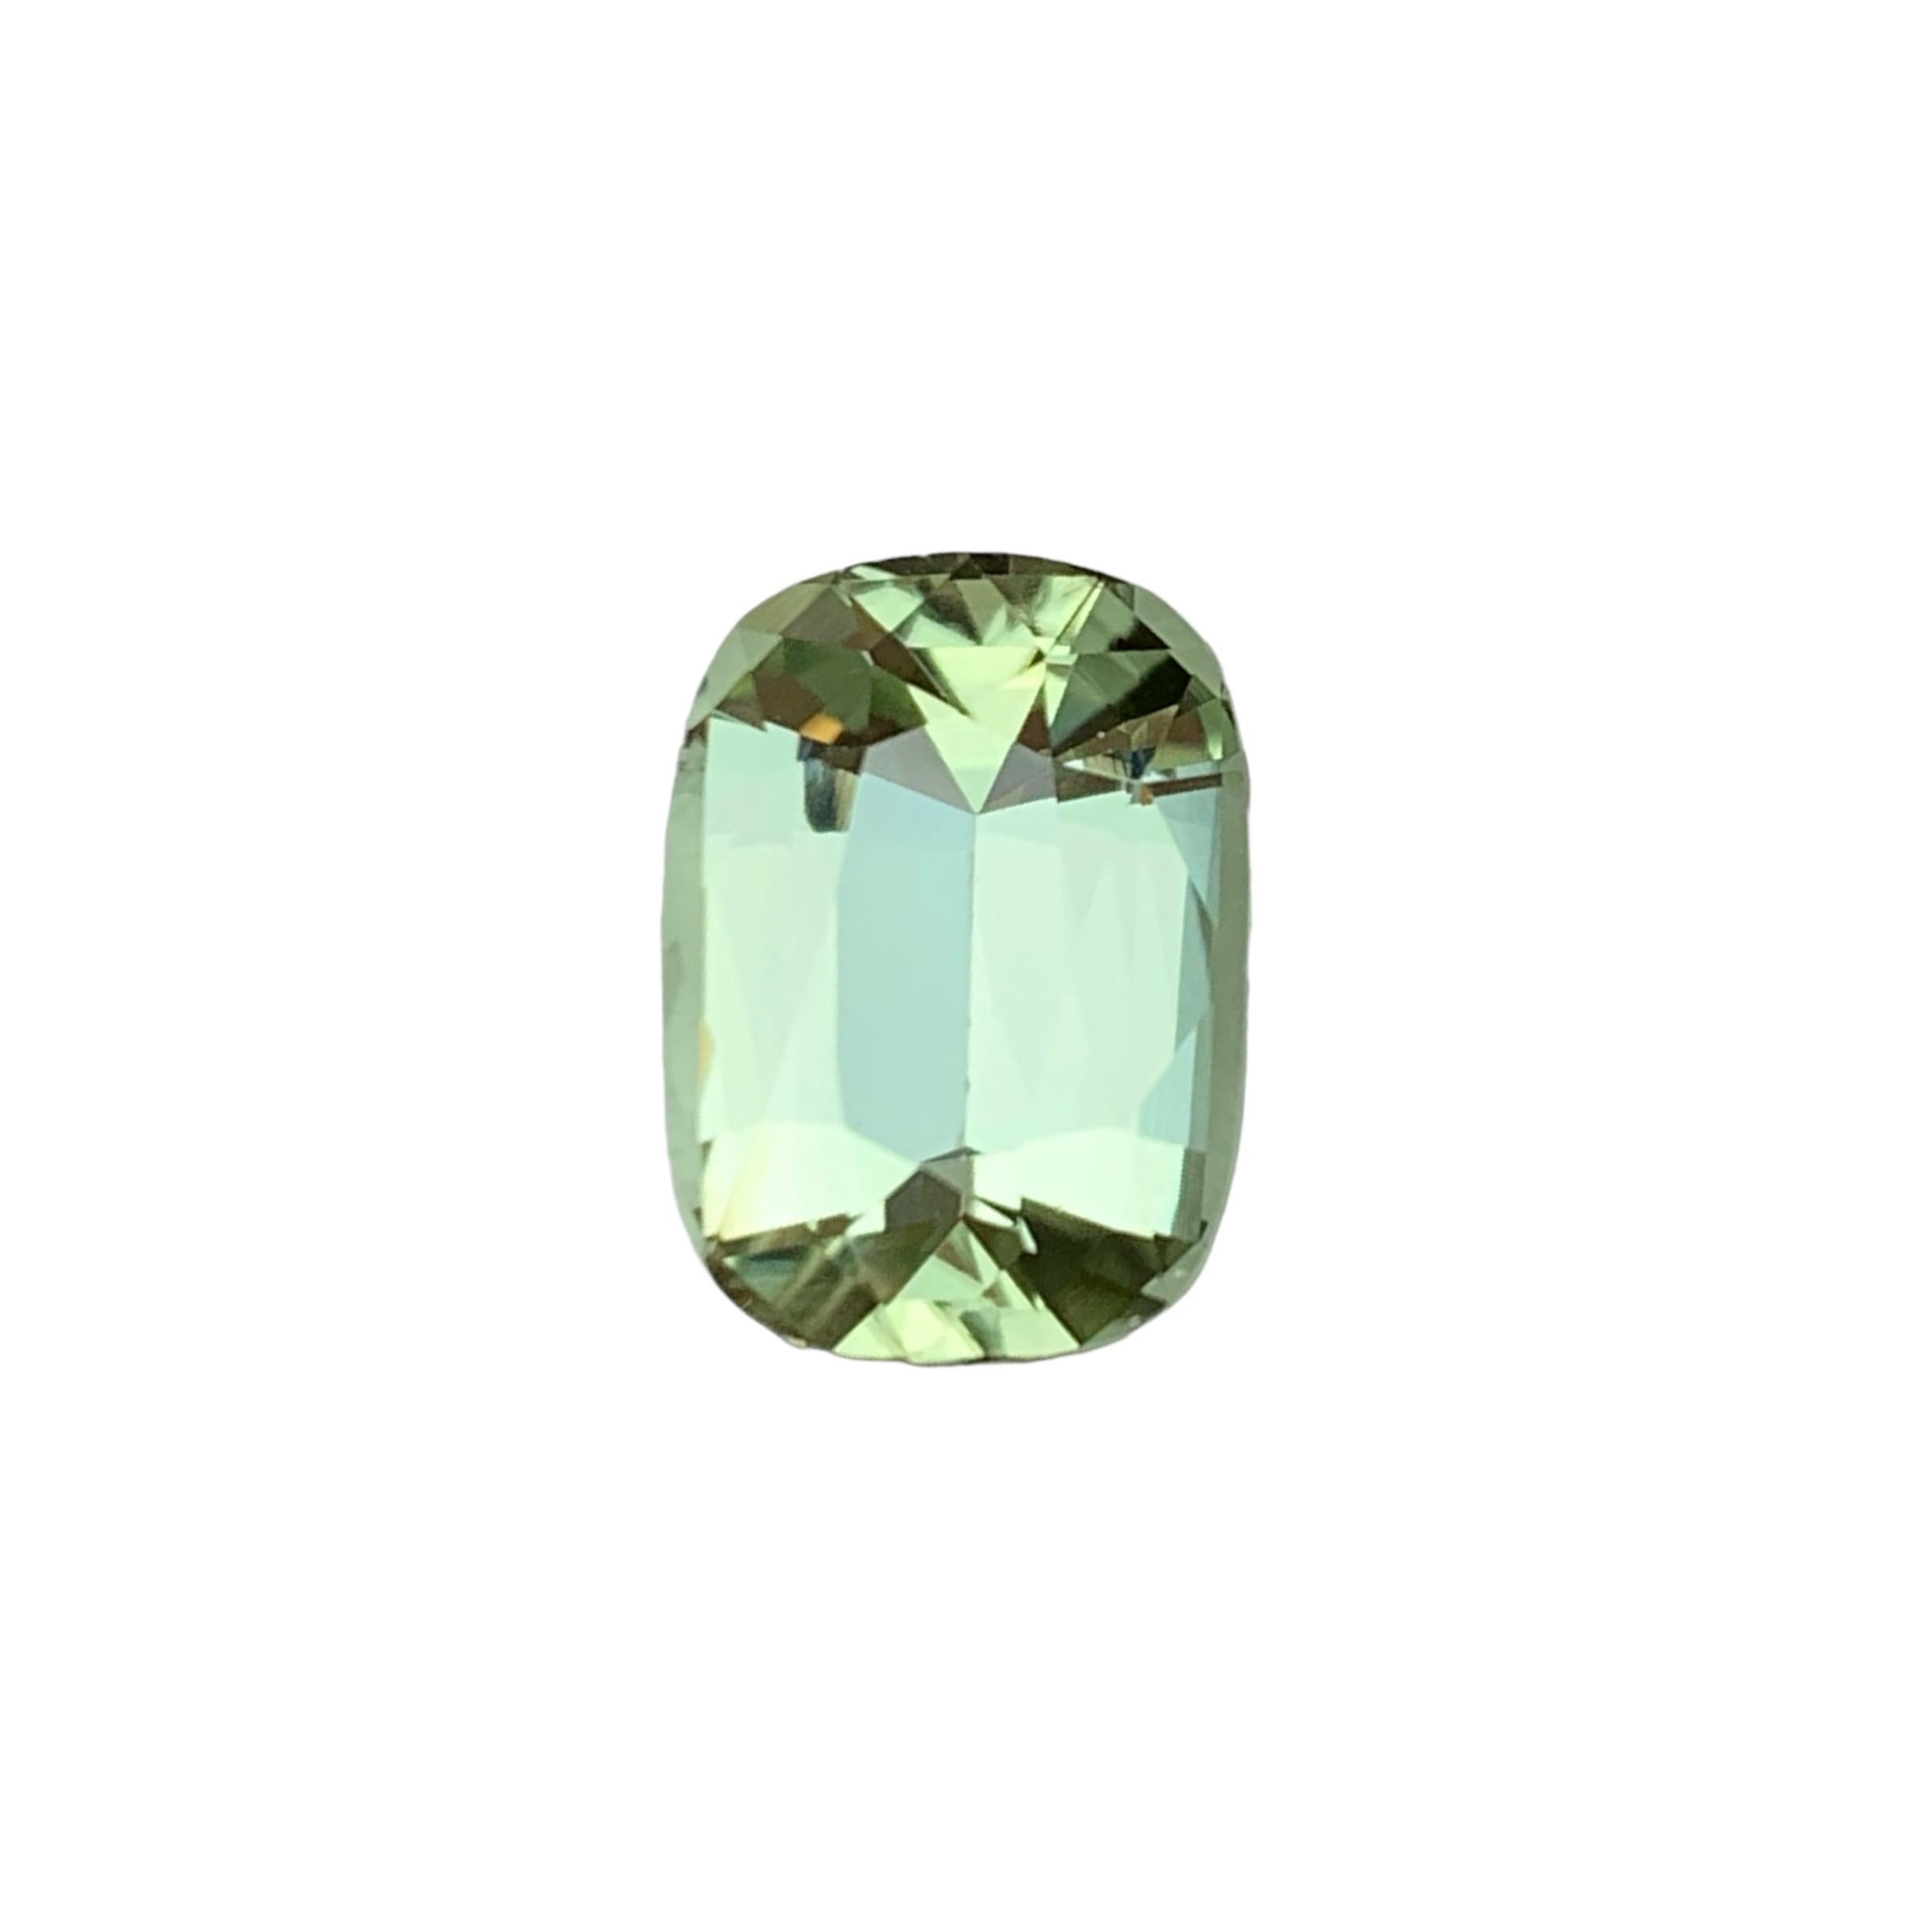 Pale Green Natural Tourmaline Gemstone 5.35 Ct Step Cushion Cut for Ring/Pendant For Sale 6